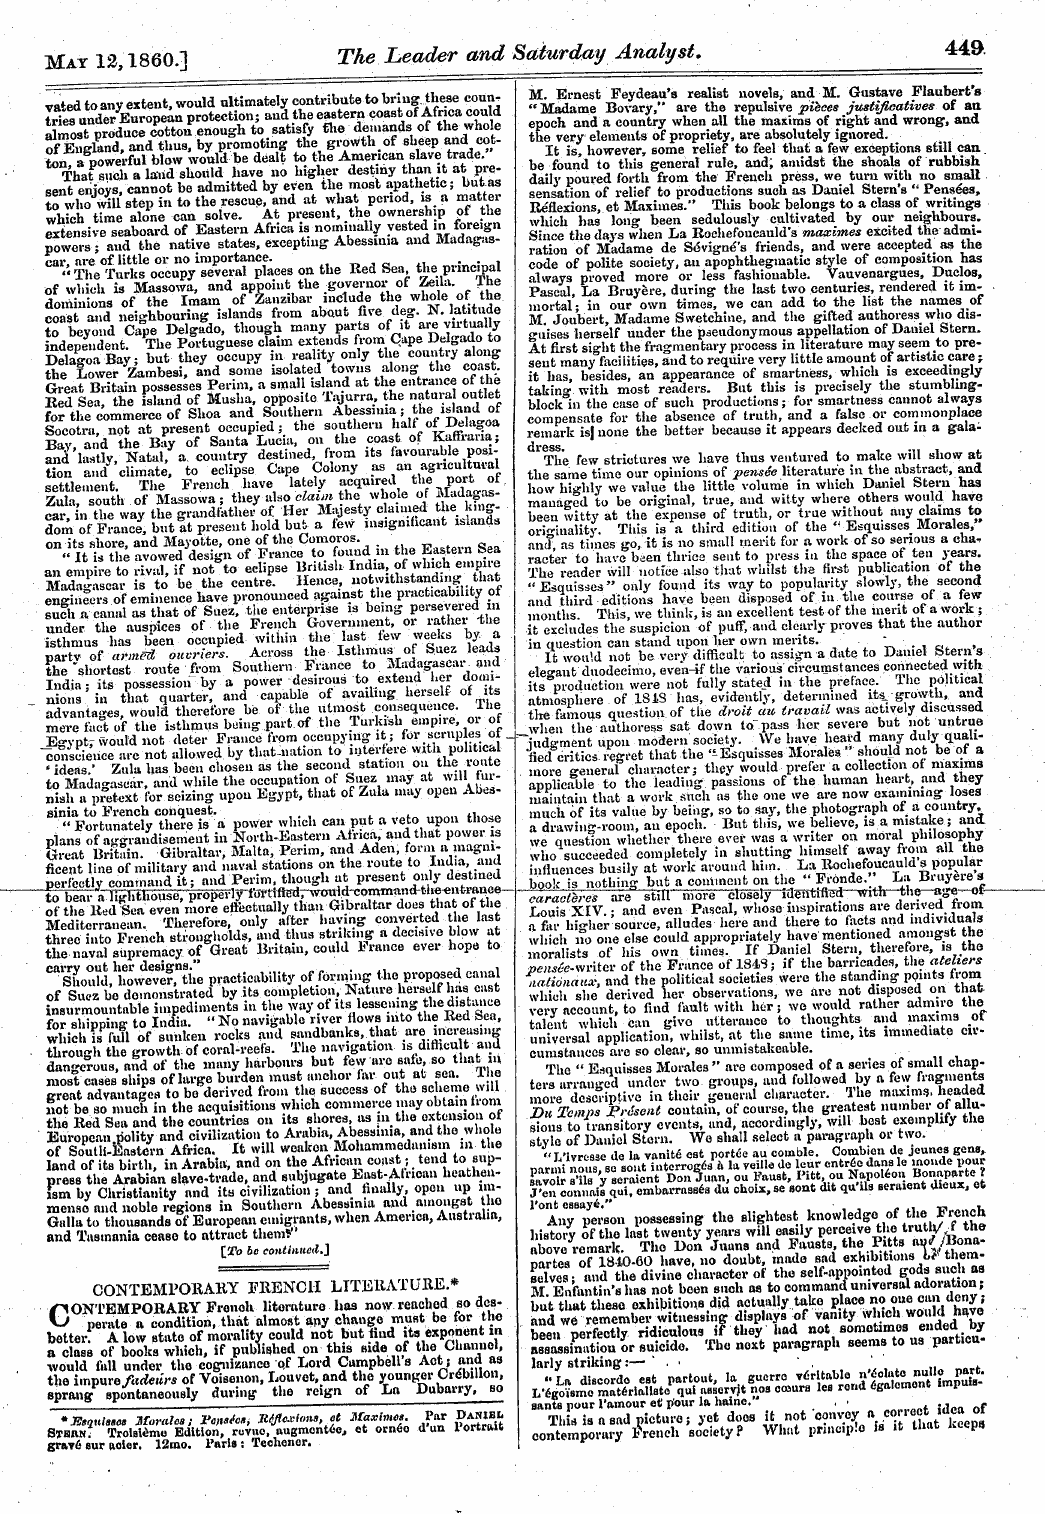 Leader (1850-1860): jS F Y, 1st edition: 13